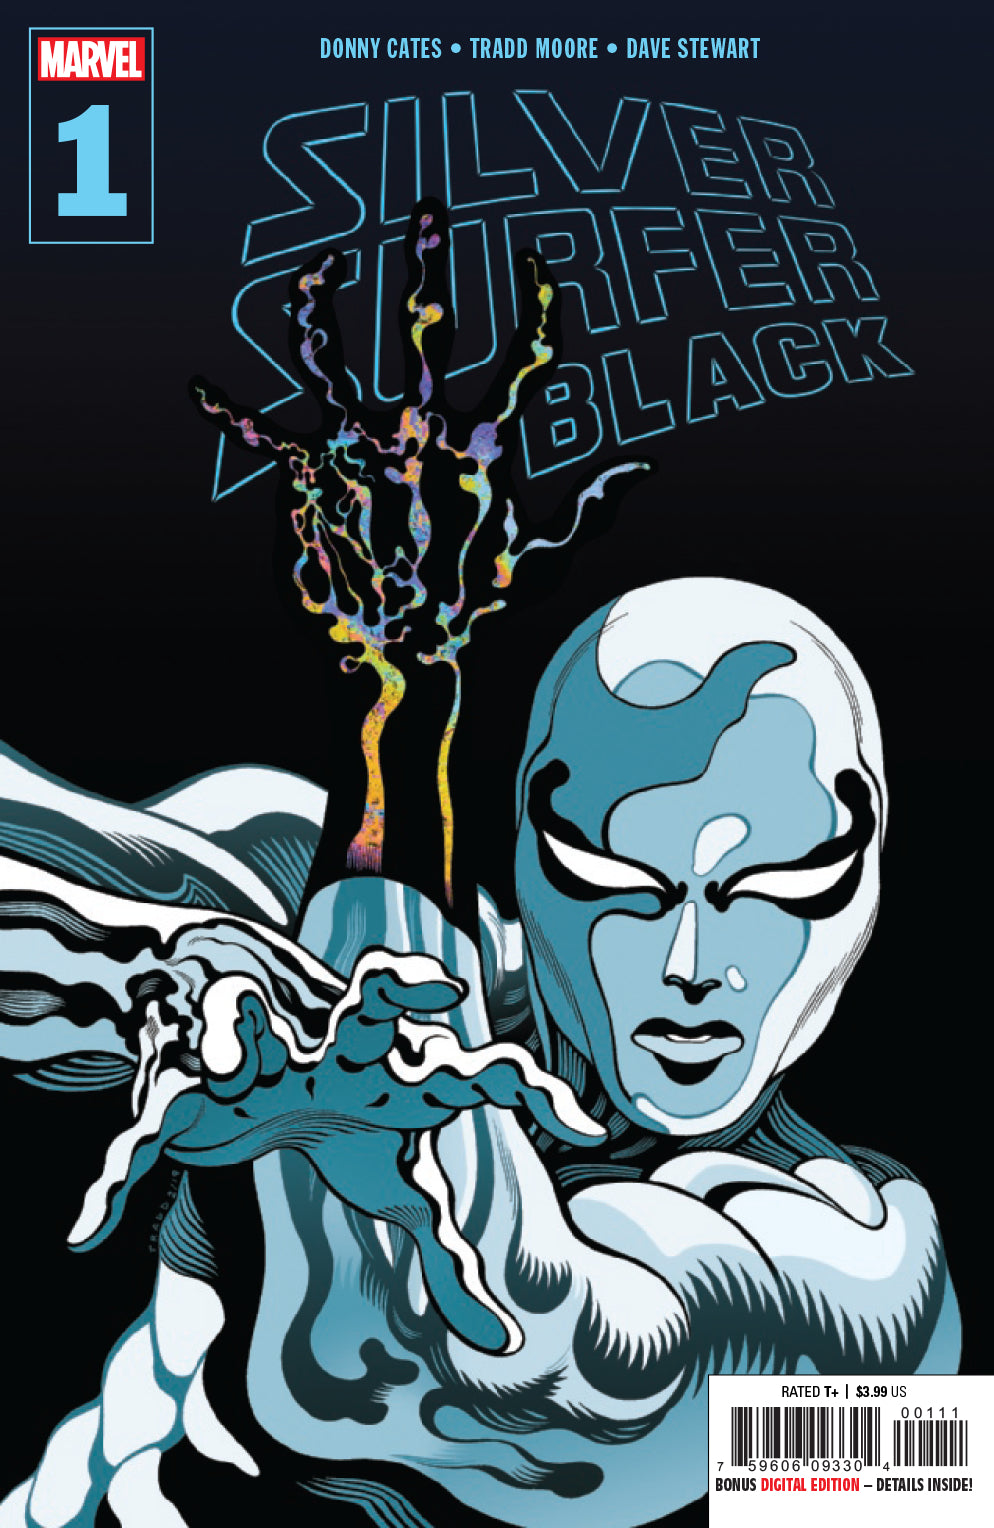 Photo of Silver Surfer Black #1 (of 5) - NM comic sold by Stronghold Collectibles